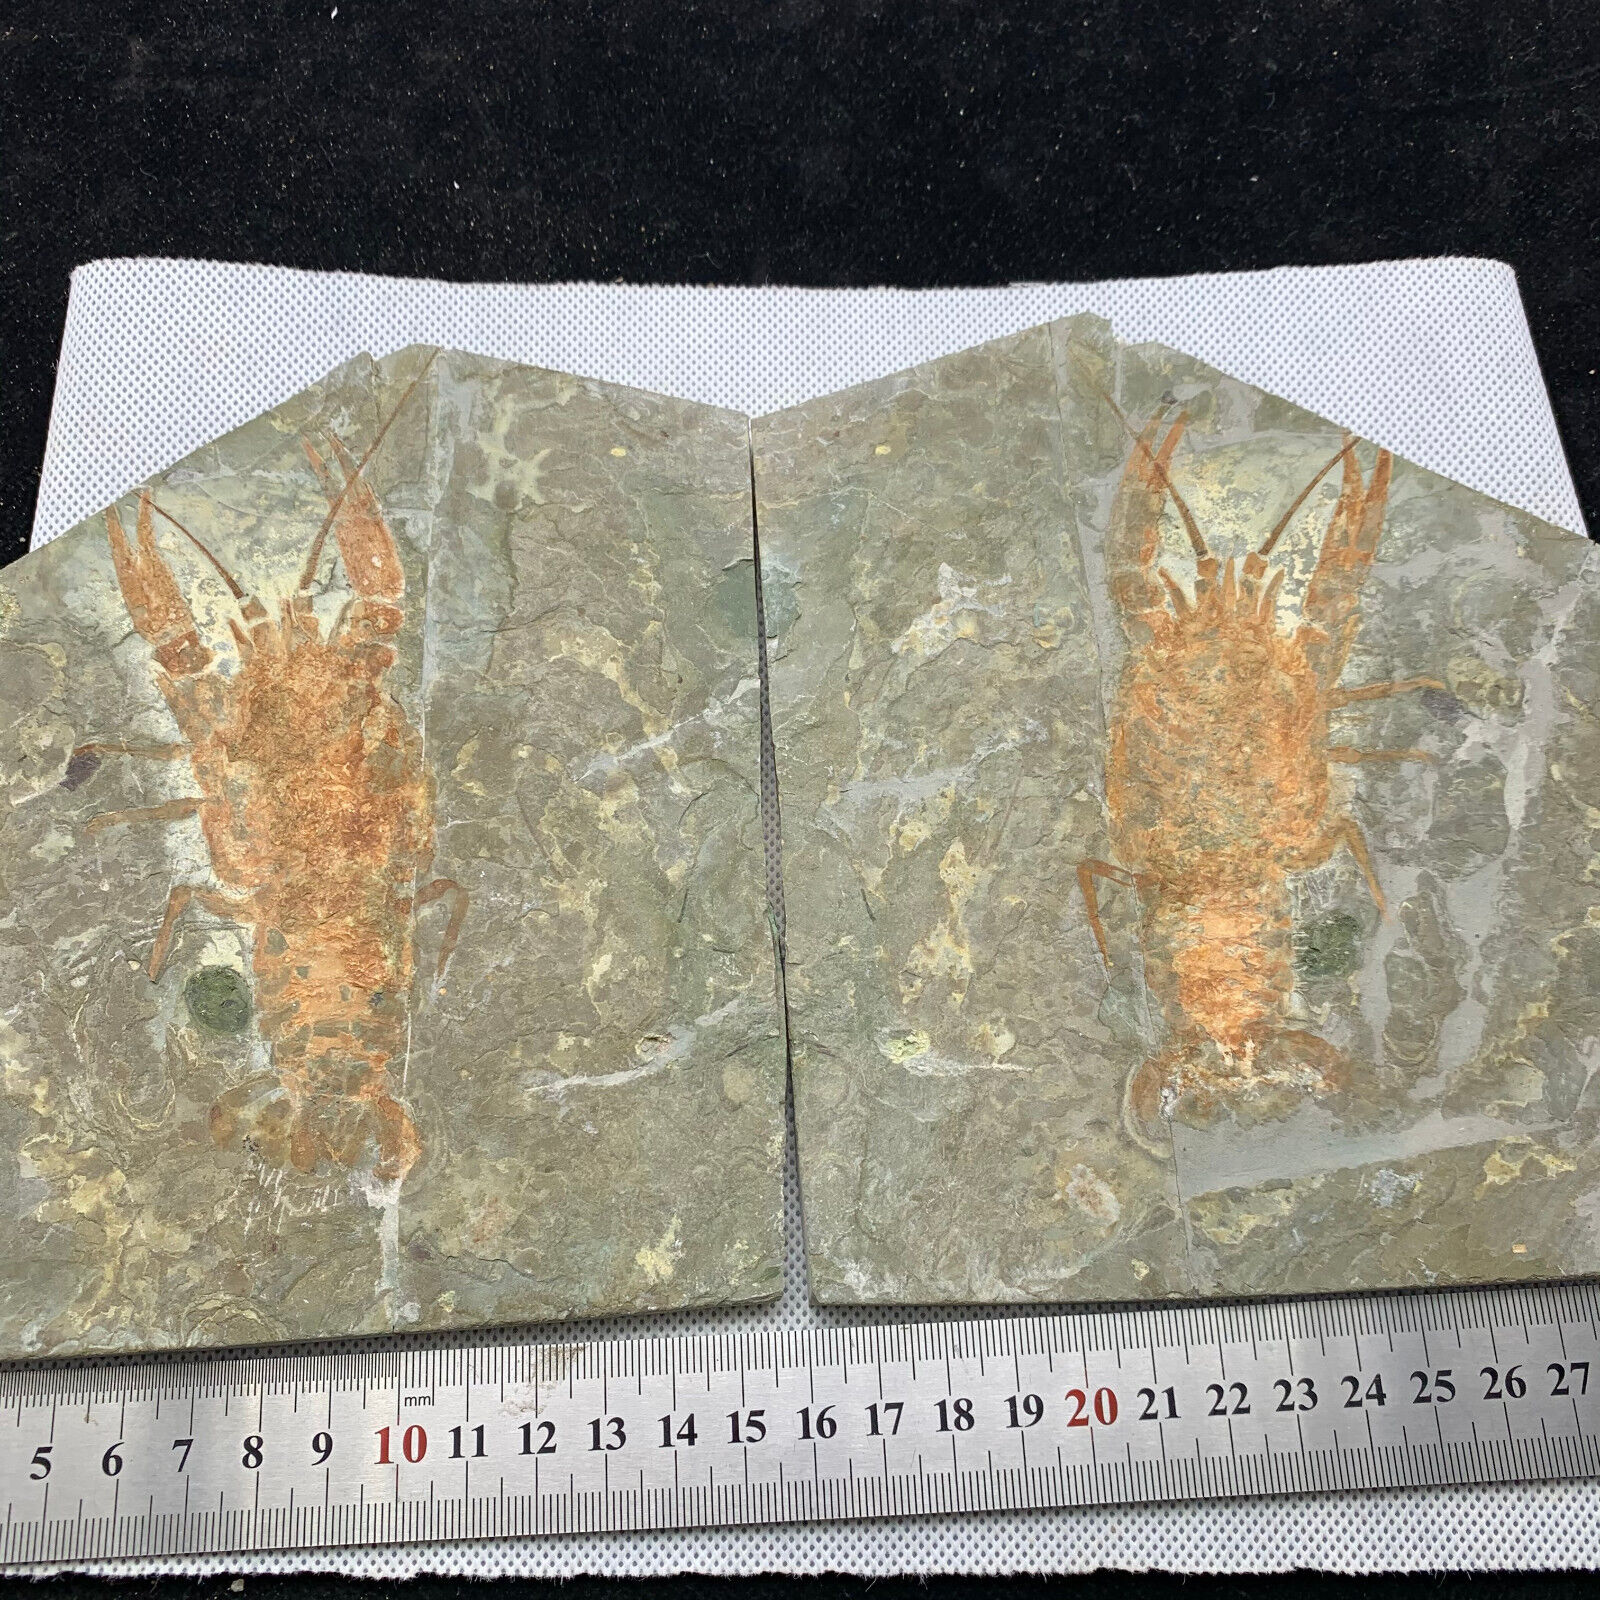 A pair of exquisite Chinese lobster fossils in the Cretaceous period